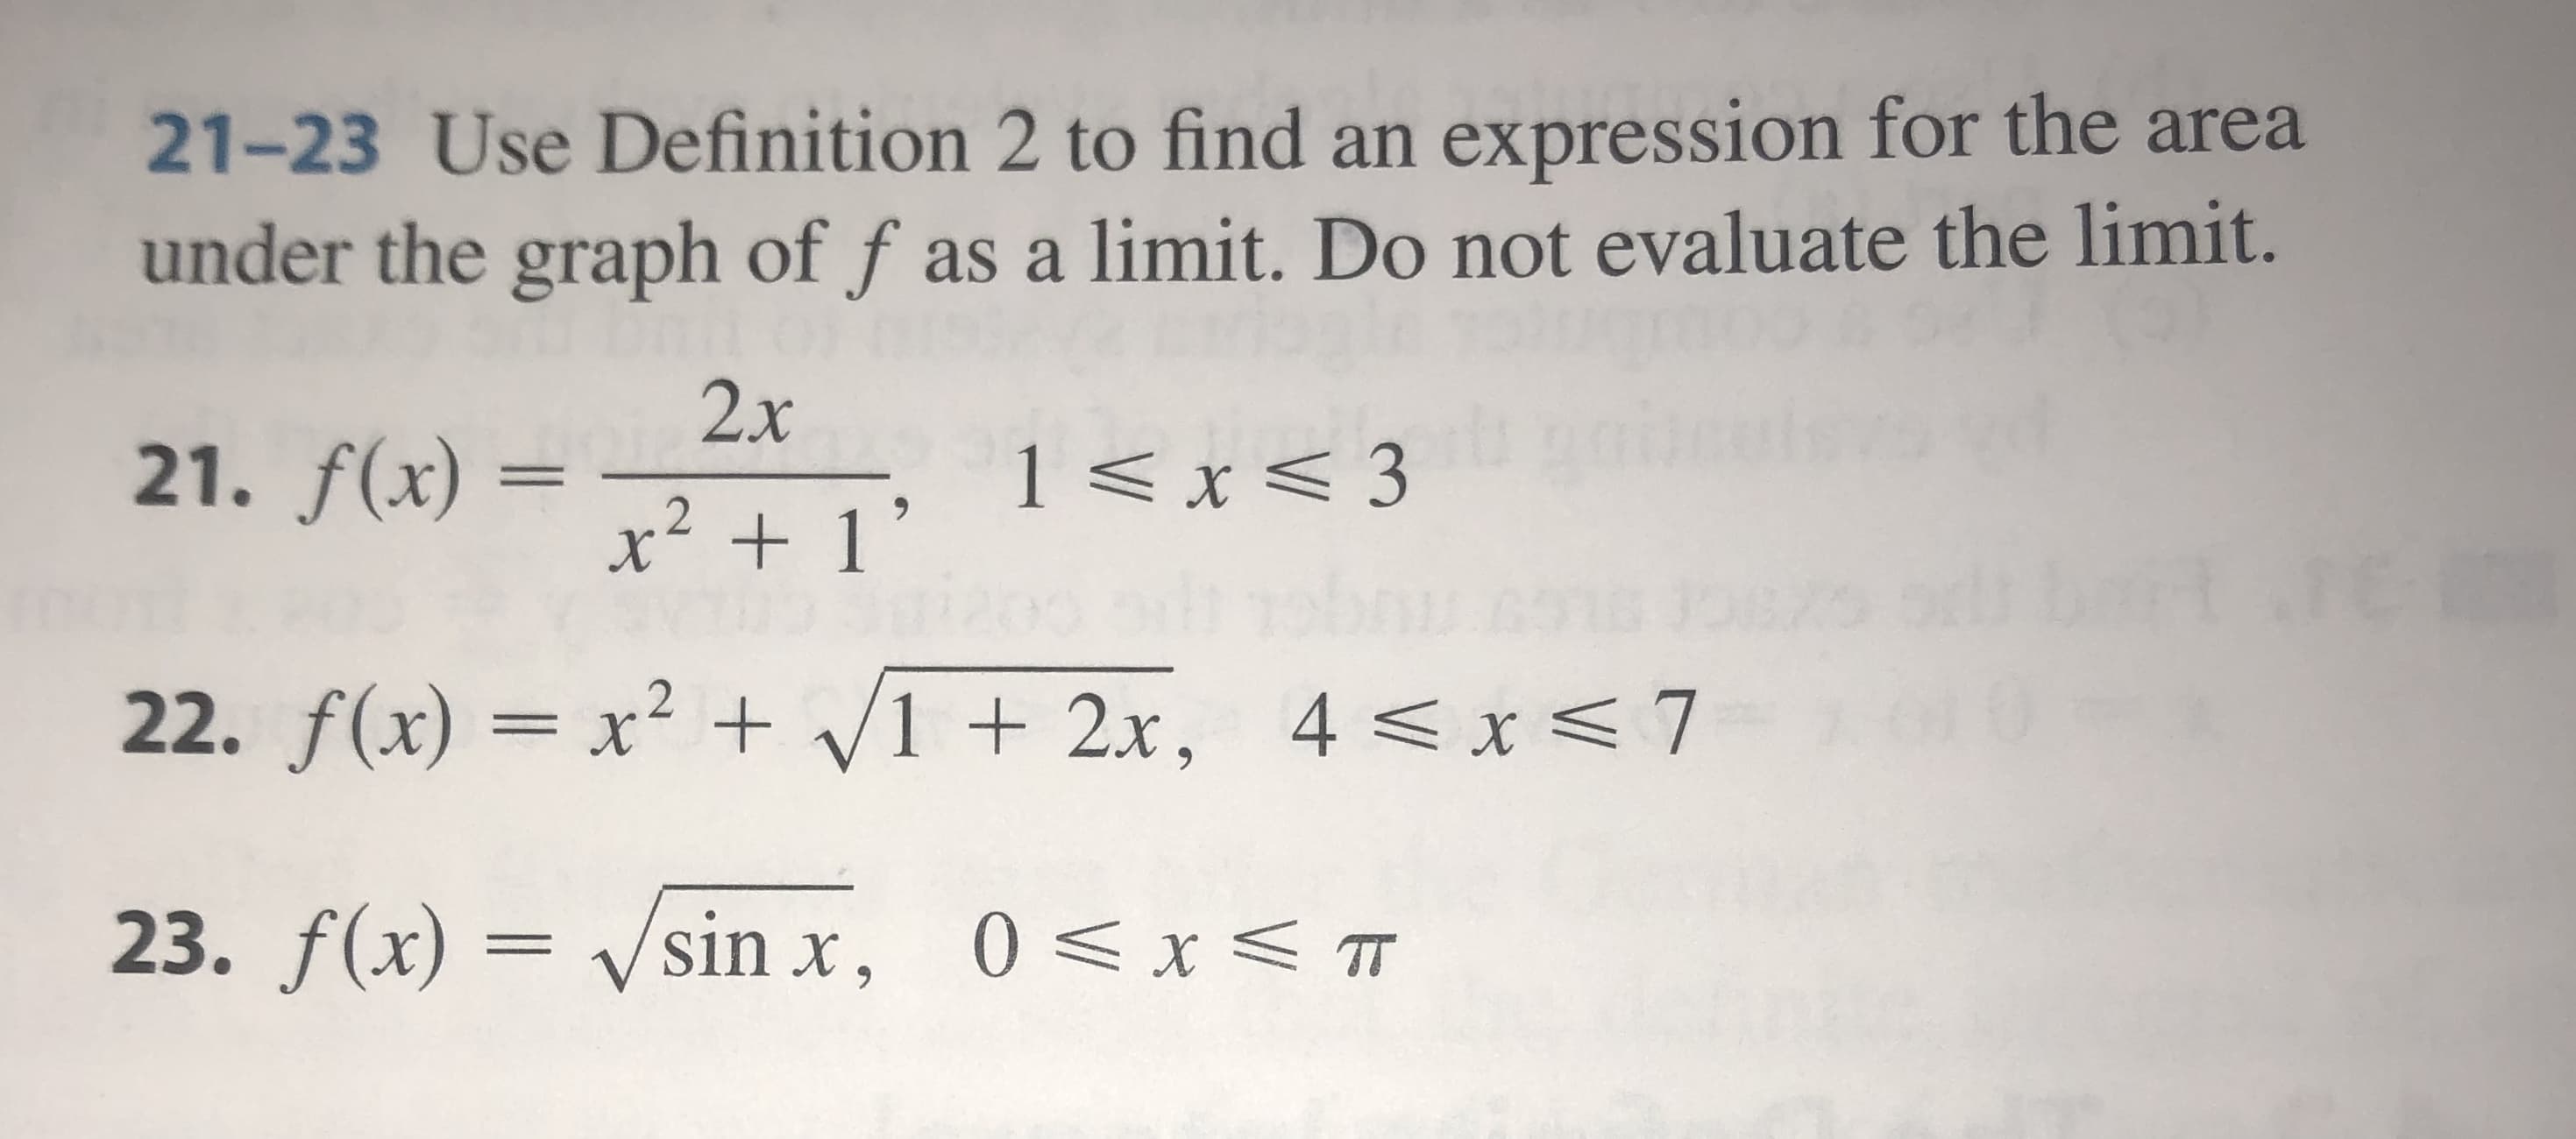 21-23 Use Definition 2 to find an expression for the area
under the graph of f as a limit. Do not evaluate the limit.
2x
21. f(x) =
1 <x<3
x 1'
22. f(x)= x2 1 2x,
4 < x<7
23. f(x)=
sin x,
0<x< T
